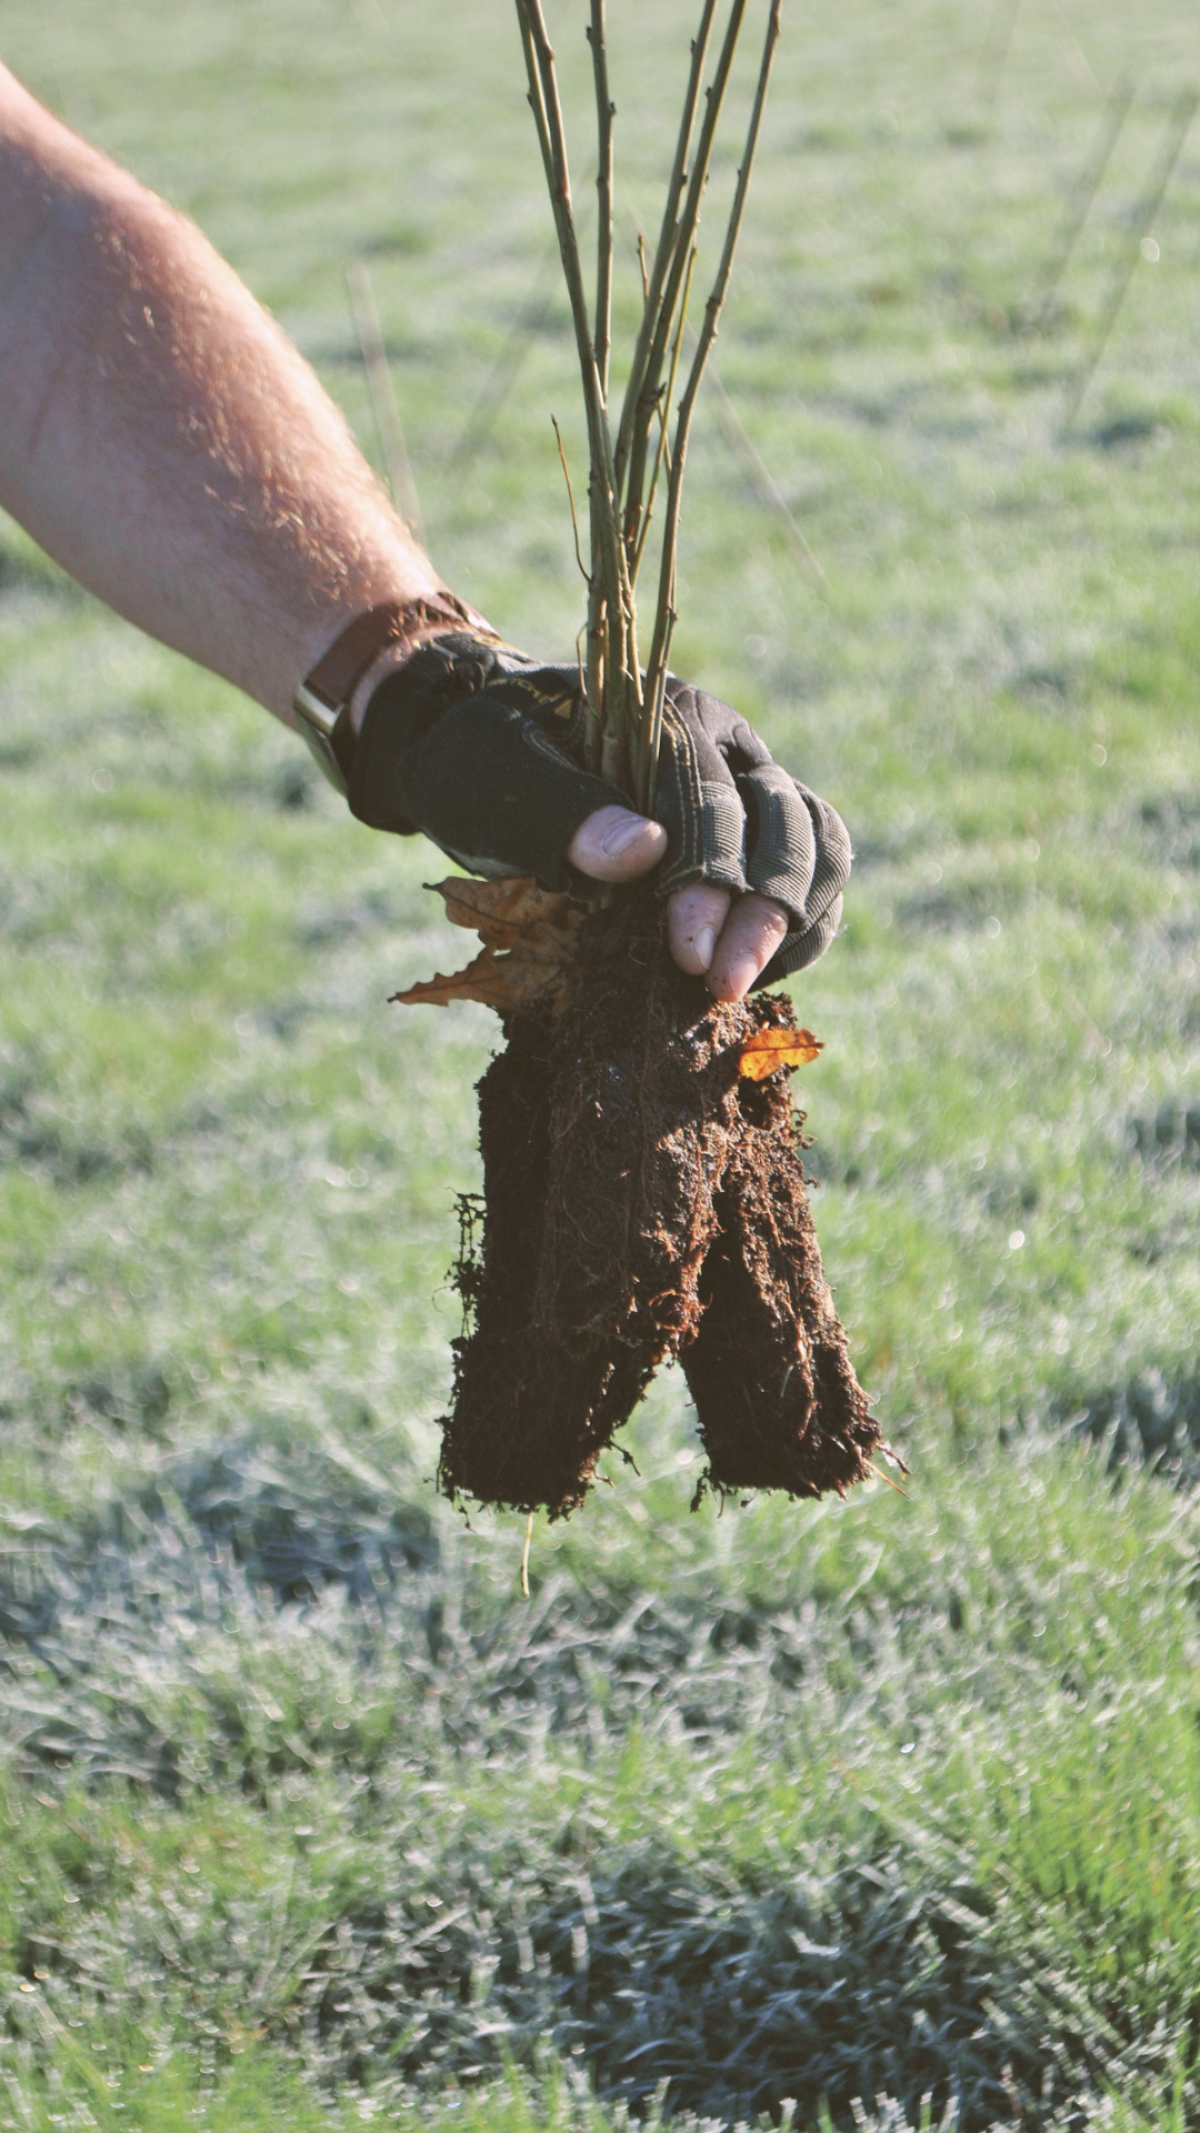 A hand holding tree saplings ready to be planted